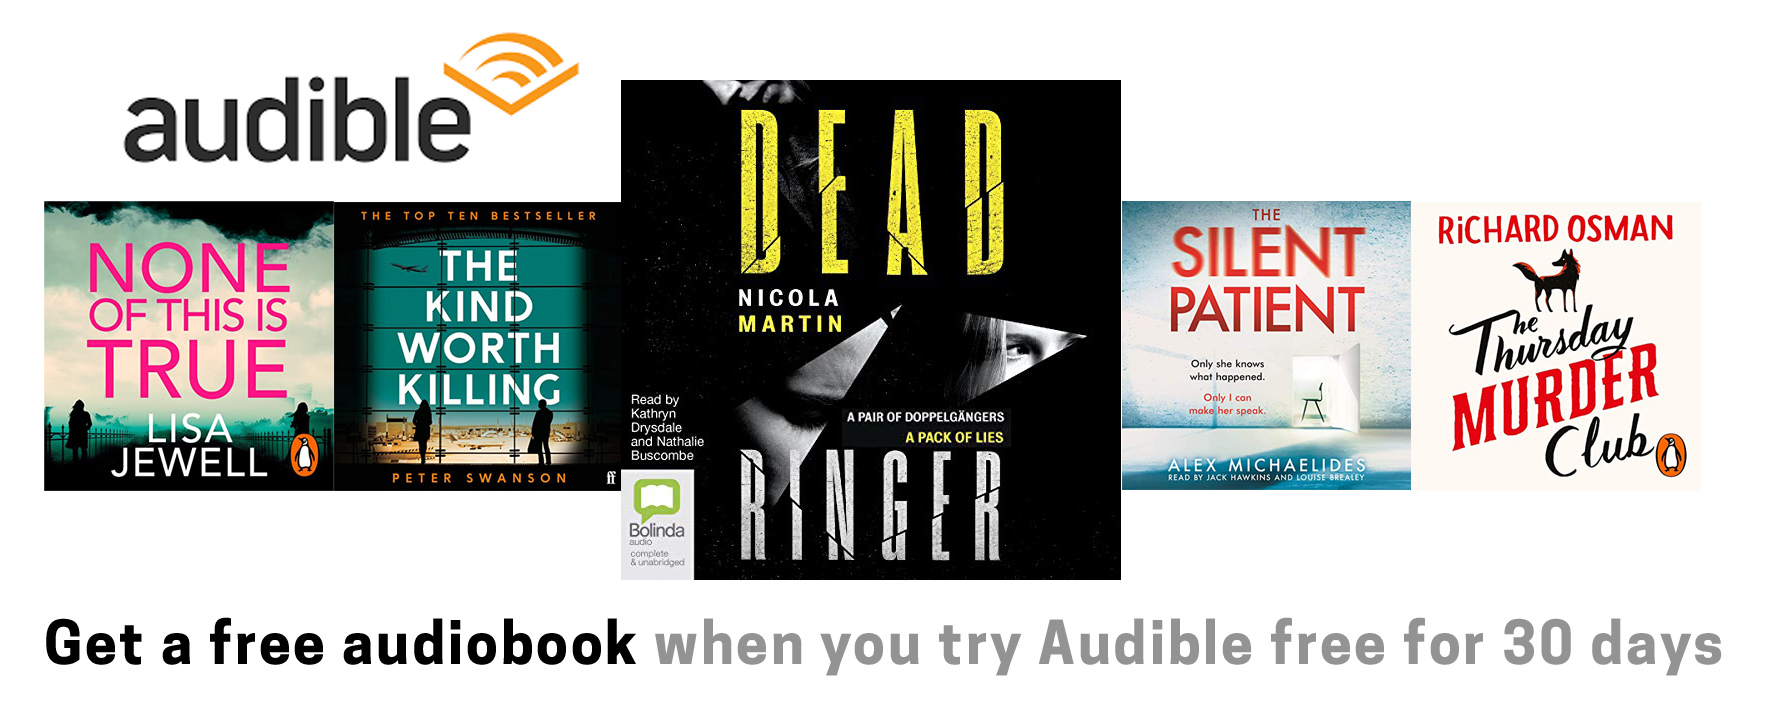 Free audiobook when you sign up for Audible